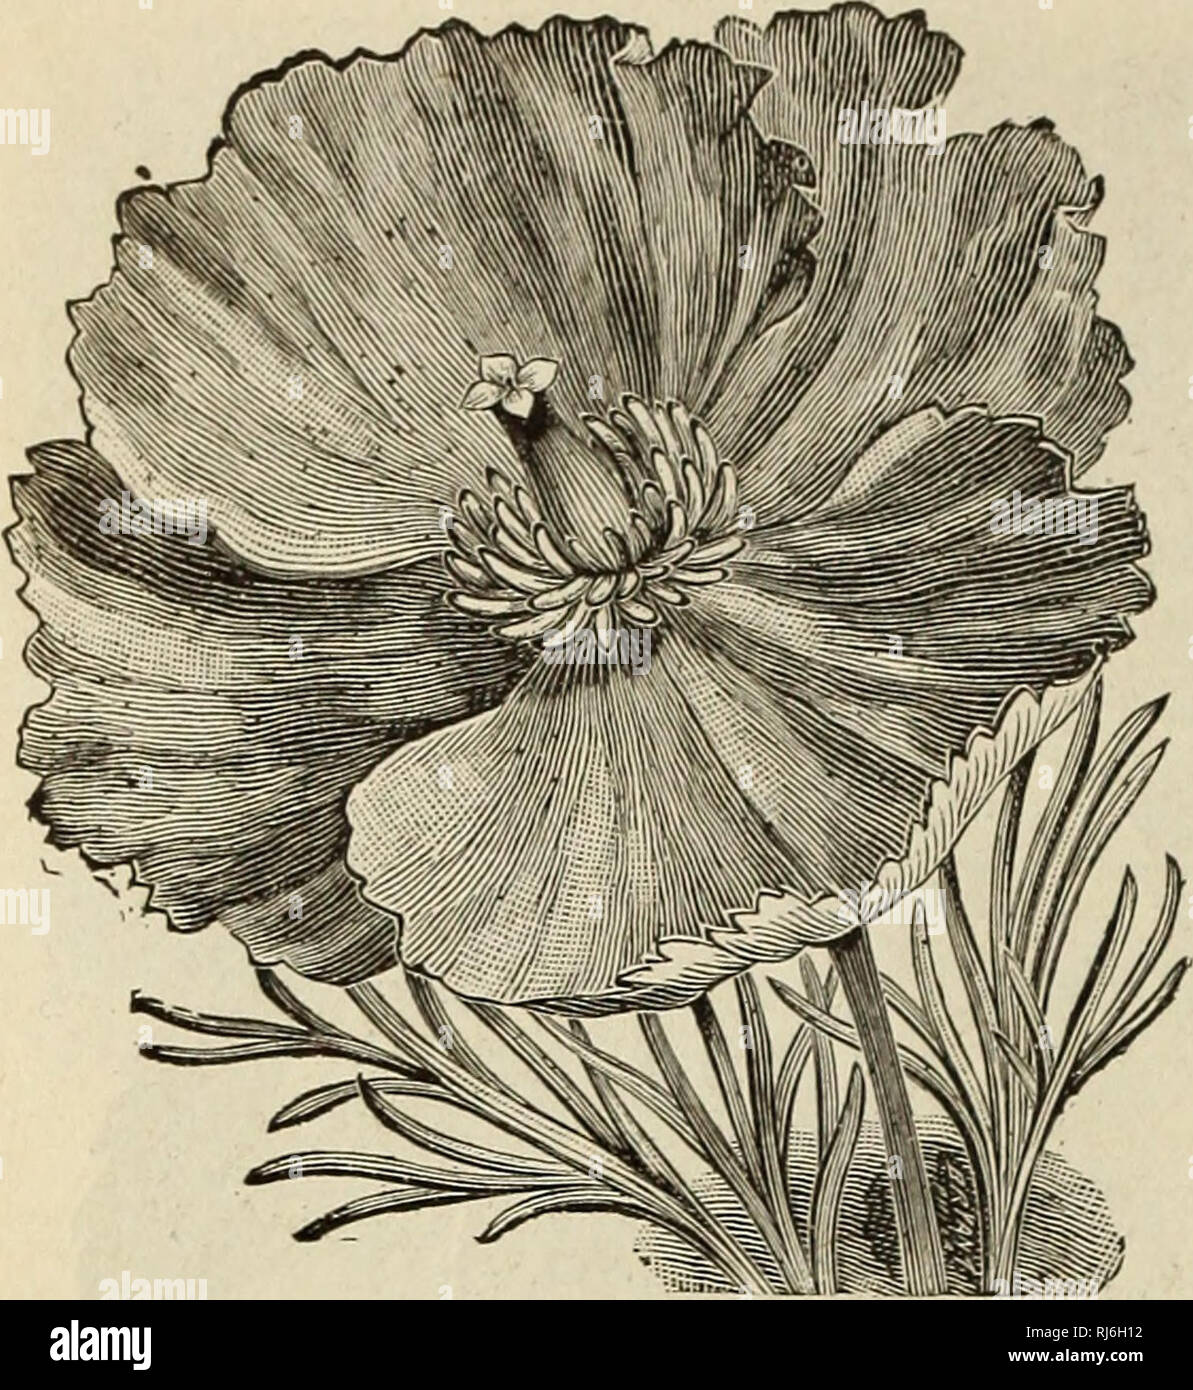 . Choice flower seeds 1912 : compliments of Miss Emma V. White. Flowers Seeds Catalogs; Seeds Catalogs; Vegetables Seeds Catalogs. MISS EMMA V. WHITE. ESCHSCHOLTZIA, or California Poppy Eschscholtzia, Burbank's New Crimson. Lovely clear rosy-crimson flowers, the most beau- tiful of the new crimson-flowered type. 1 ft. Pkt., 200 seeds. 5c. Bush Eschscholtzia. The plant makes a low shrubby bush, with flowers like the ordinary Esch- scholtzia In color and form but daintily crinkled and extra large, on long stiff stems. The most beautiful thing in yellow for cut flowers. Pkt., 100 seeds, 5c. Eschs Stock Photo